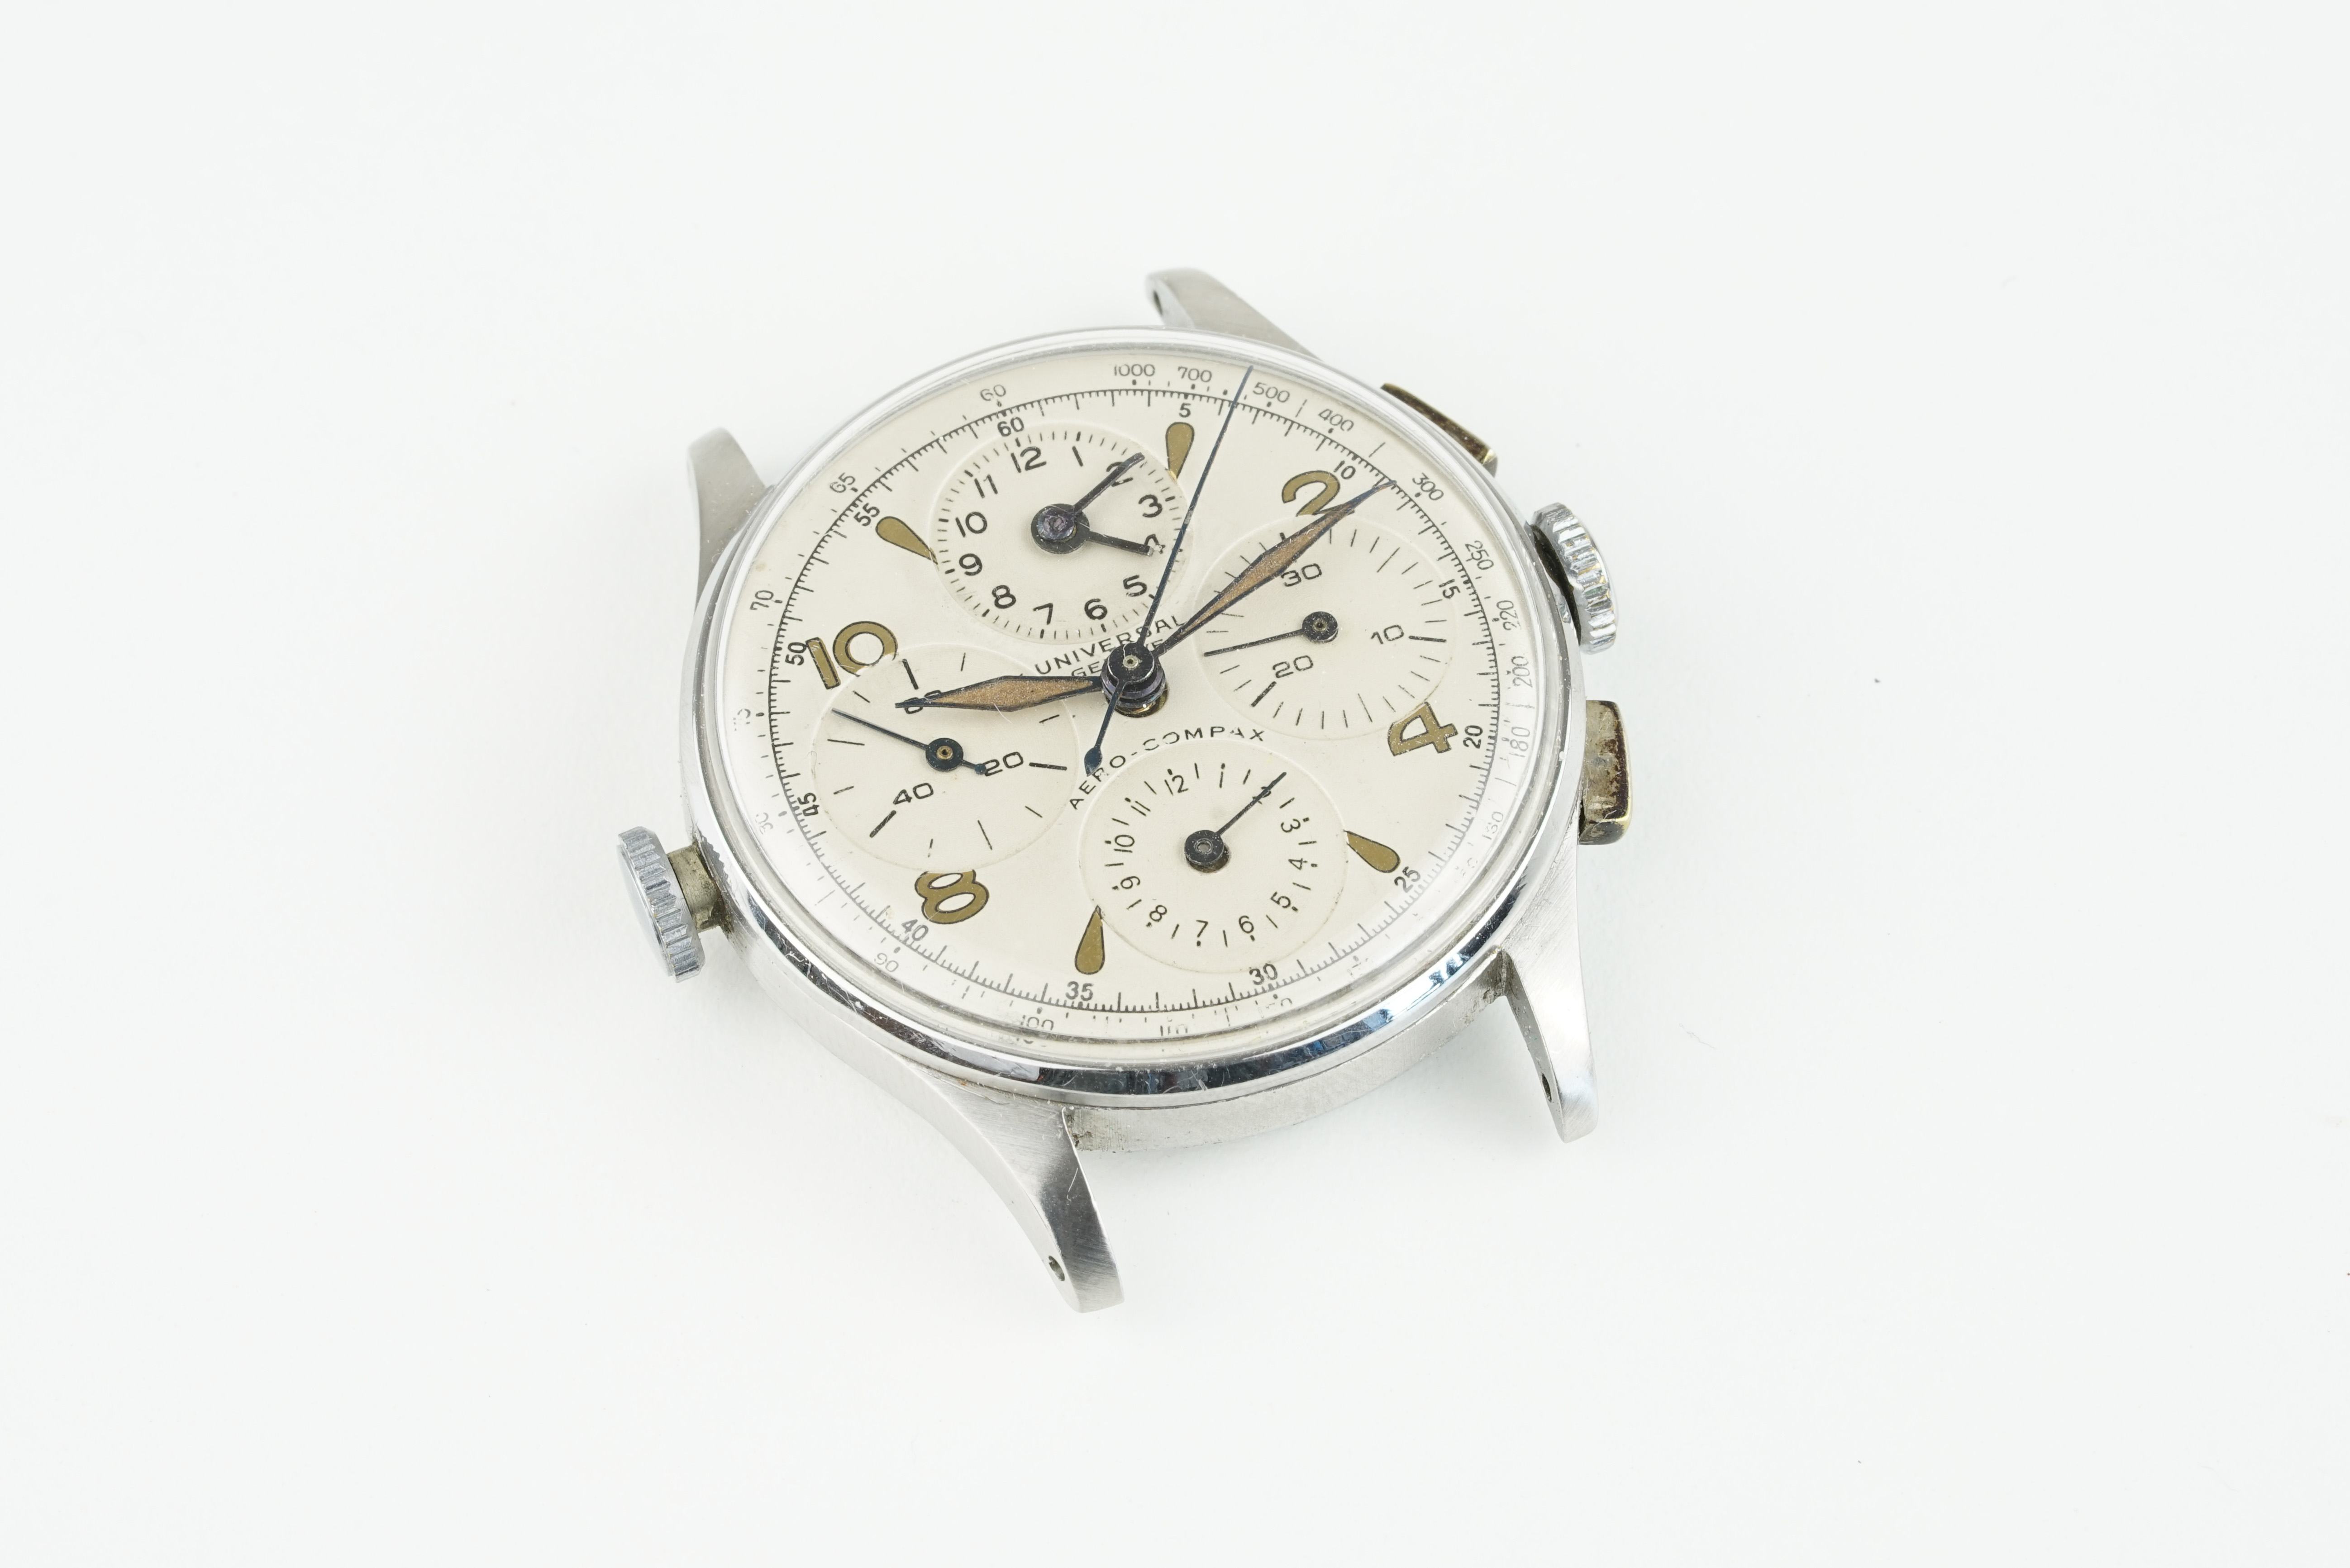 UNIVERSAL GENEVE AERO-COMPAX CHRONGORAPH WRISTWATCH, circular off white dial with four registers,